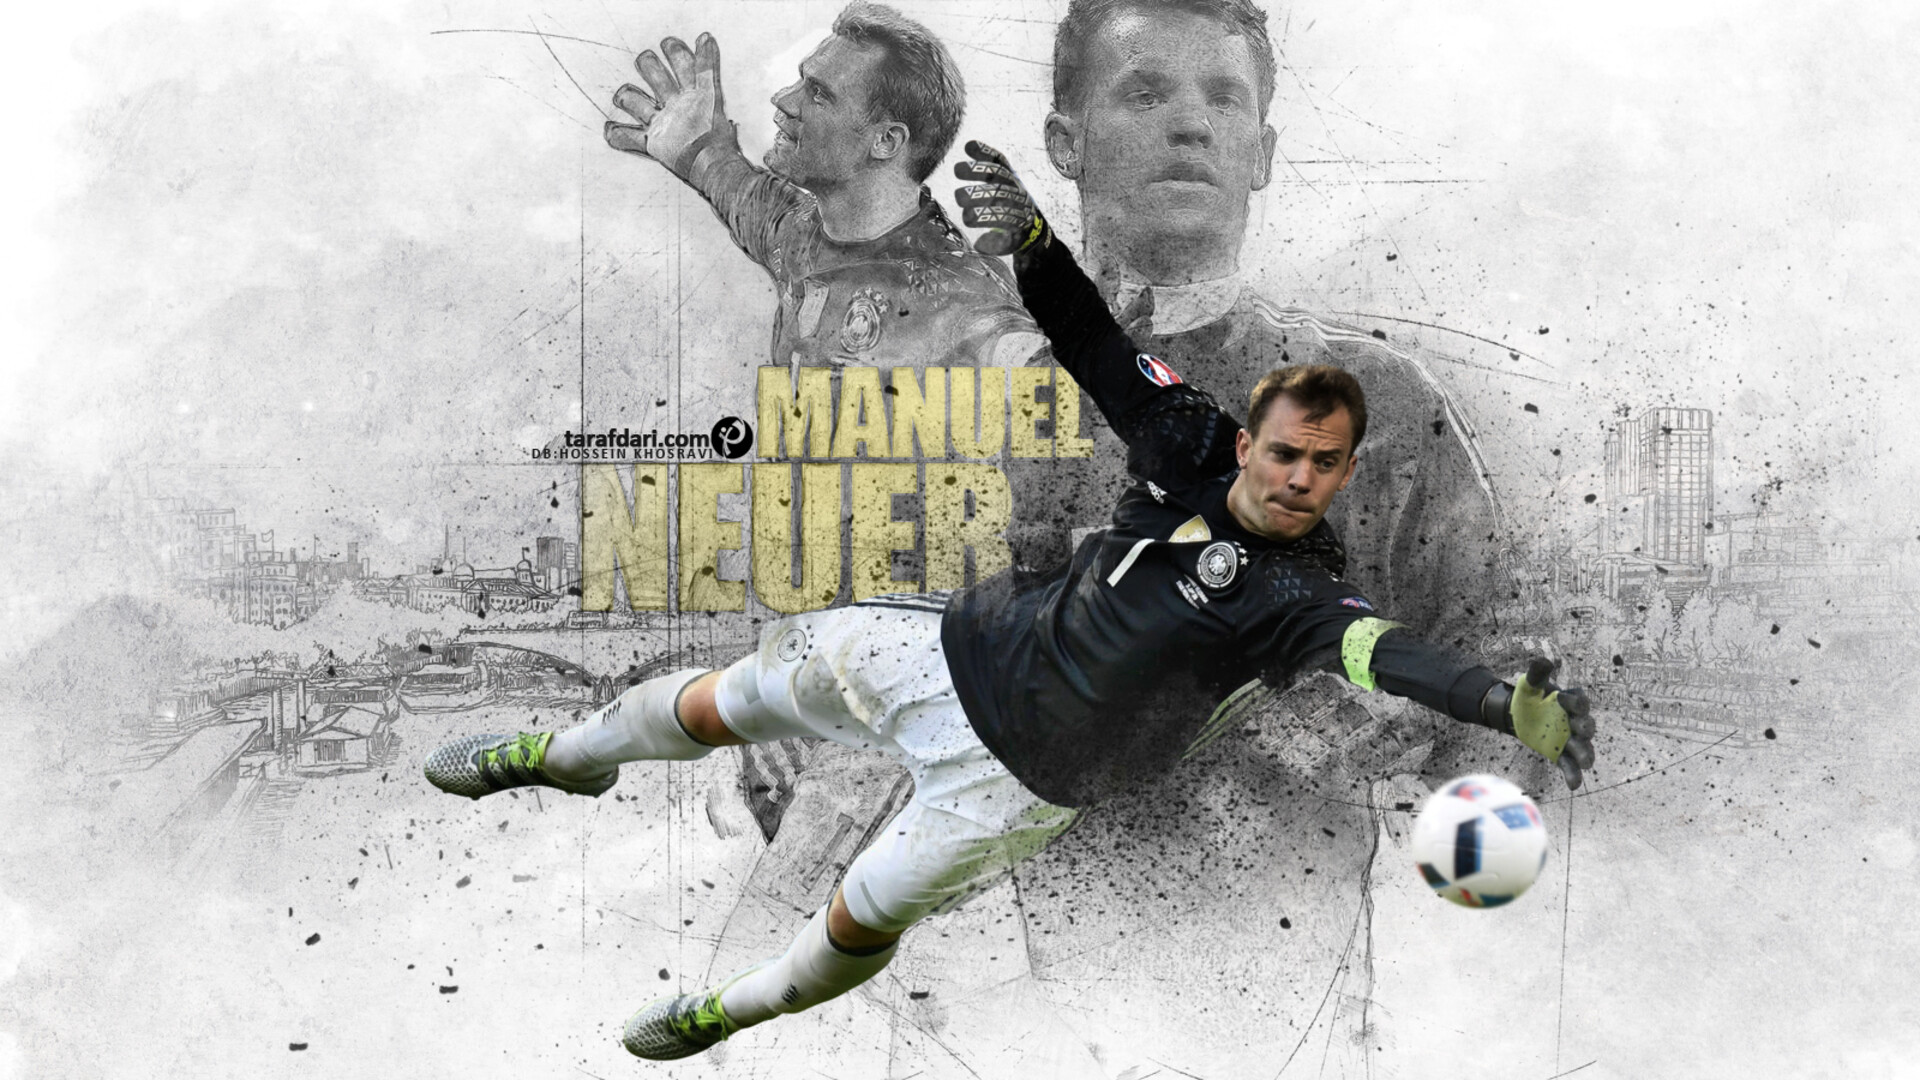 Germany National Football Team: Manuel Neuer, The best goalkeeper of the decade from 2011 to 2020 by IFFHS, Bayern Munich captain. 1920x1080 Full HD Background.